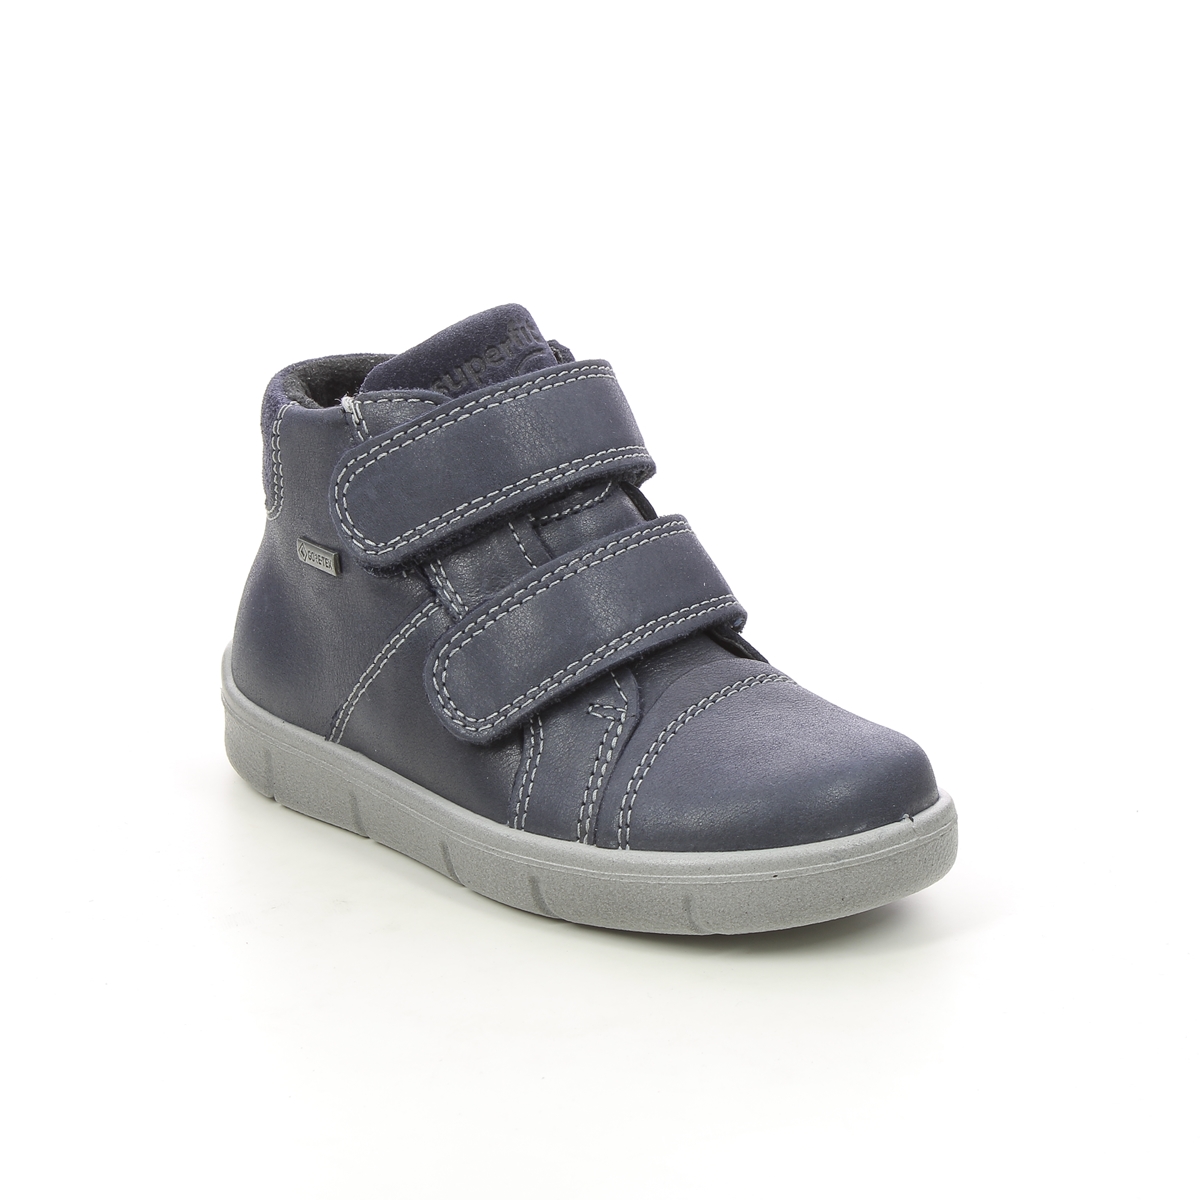 Superfit Ulli 2V Gtx Navy Leather Kids Toddler Boys Boots 0800423-8000 In Size 23 In Plain Navy Leather